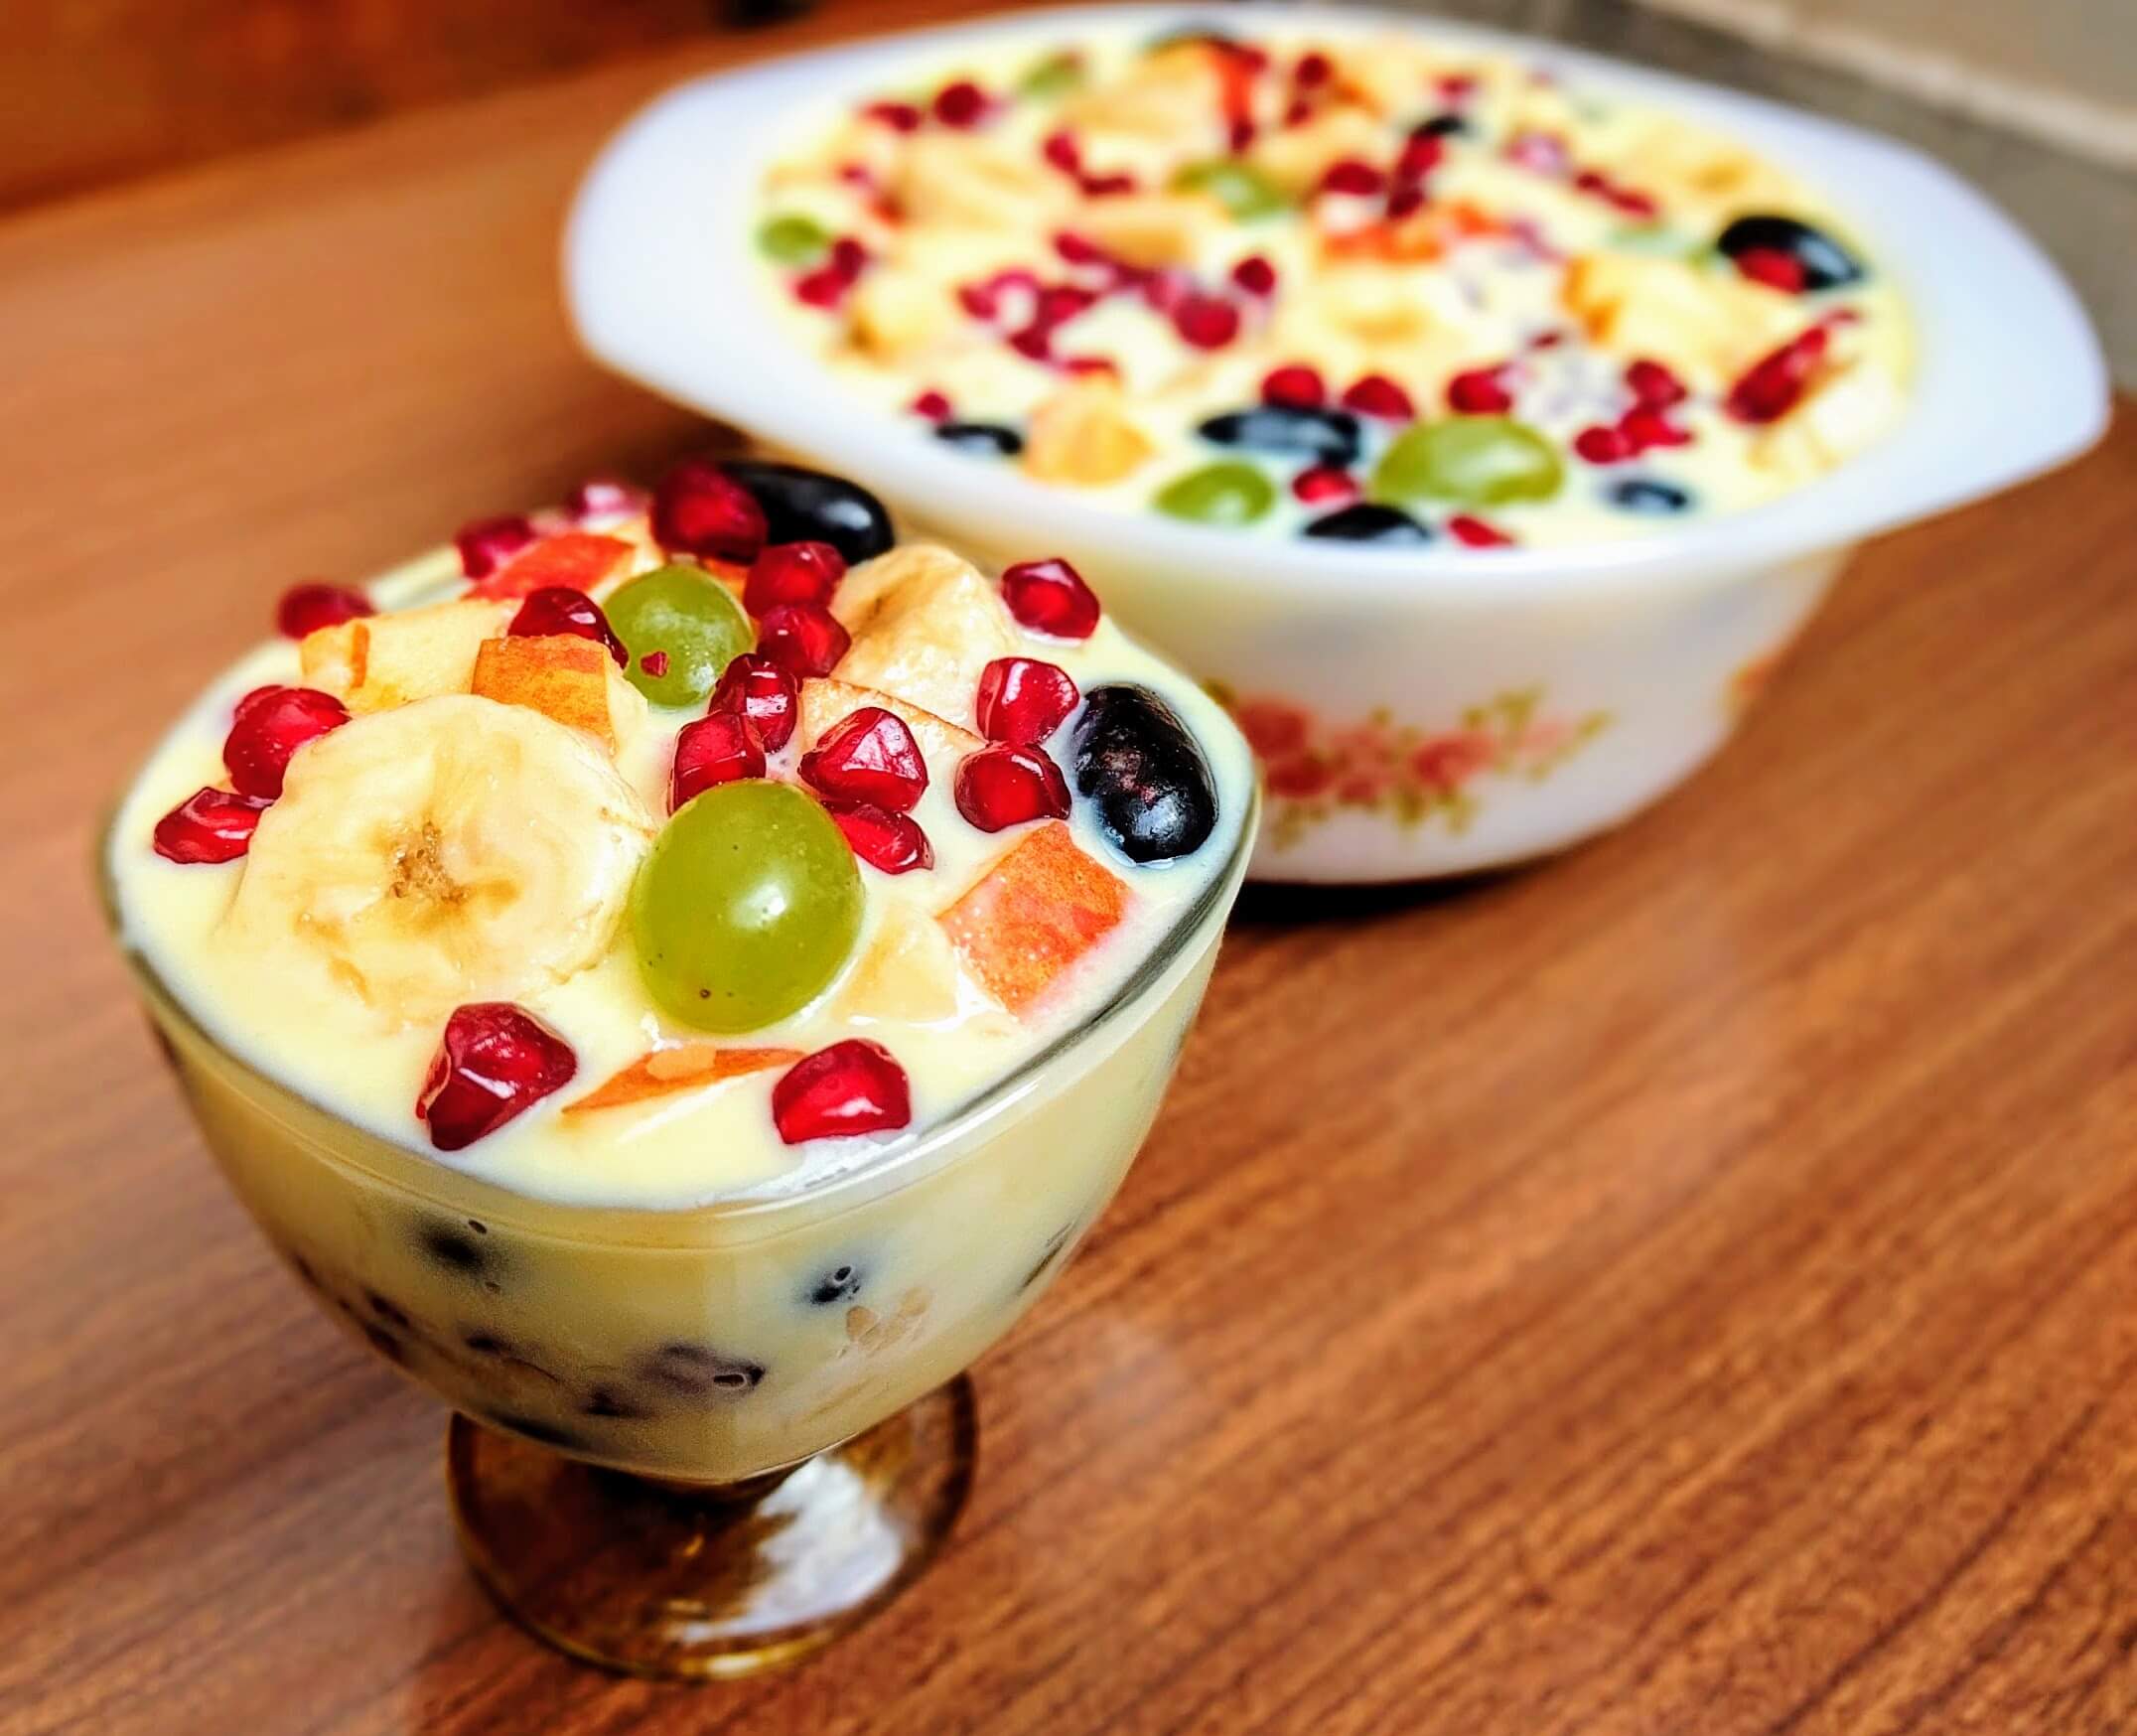 Fruit Custard is delicious and soothing dish which combines a flavorful dessert with the added health benefits for fruits.